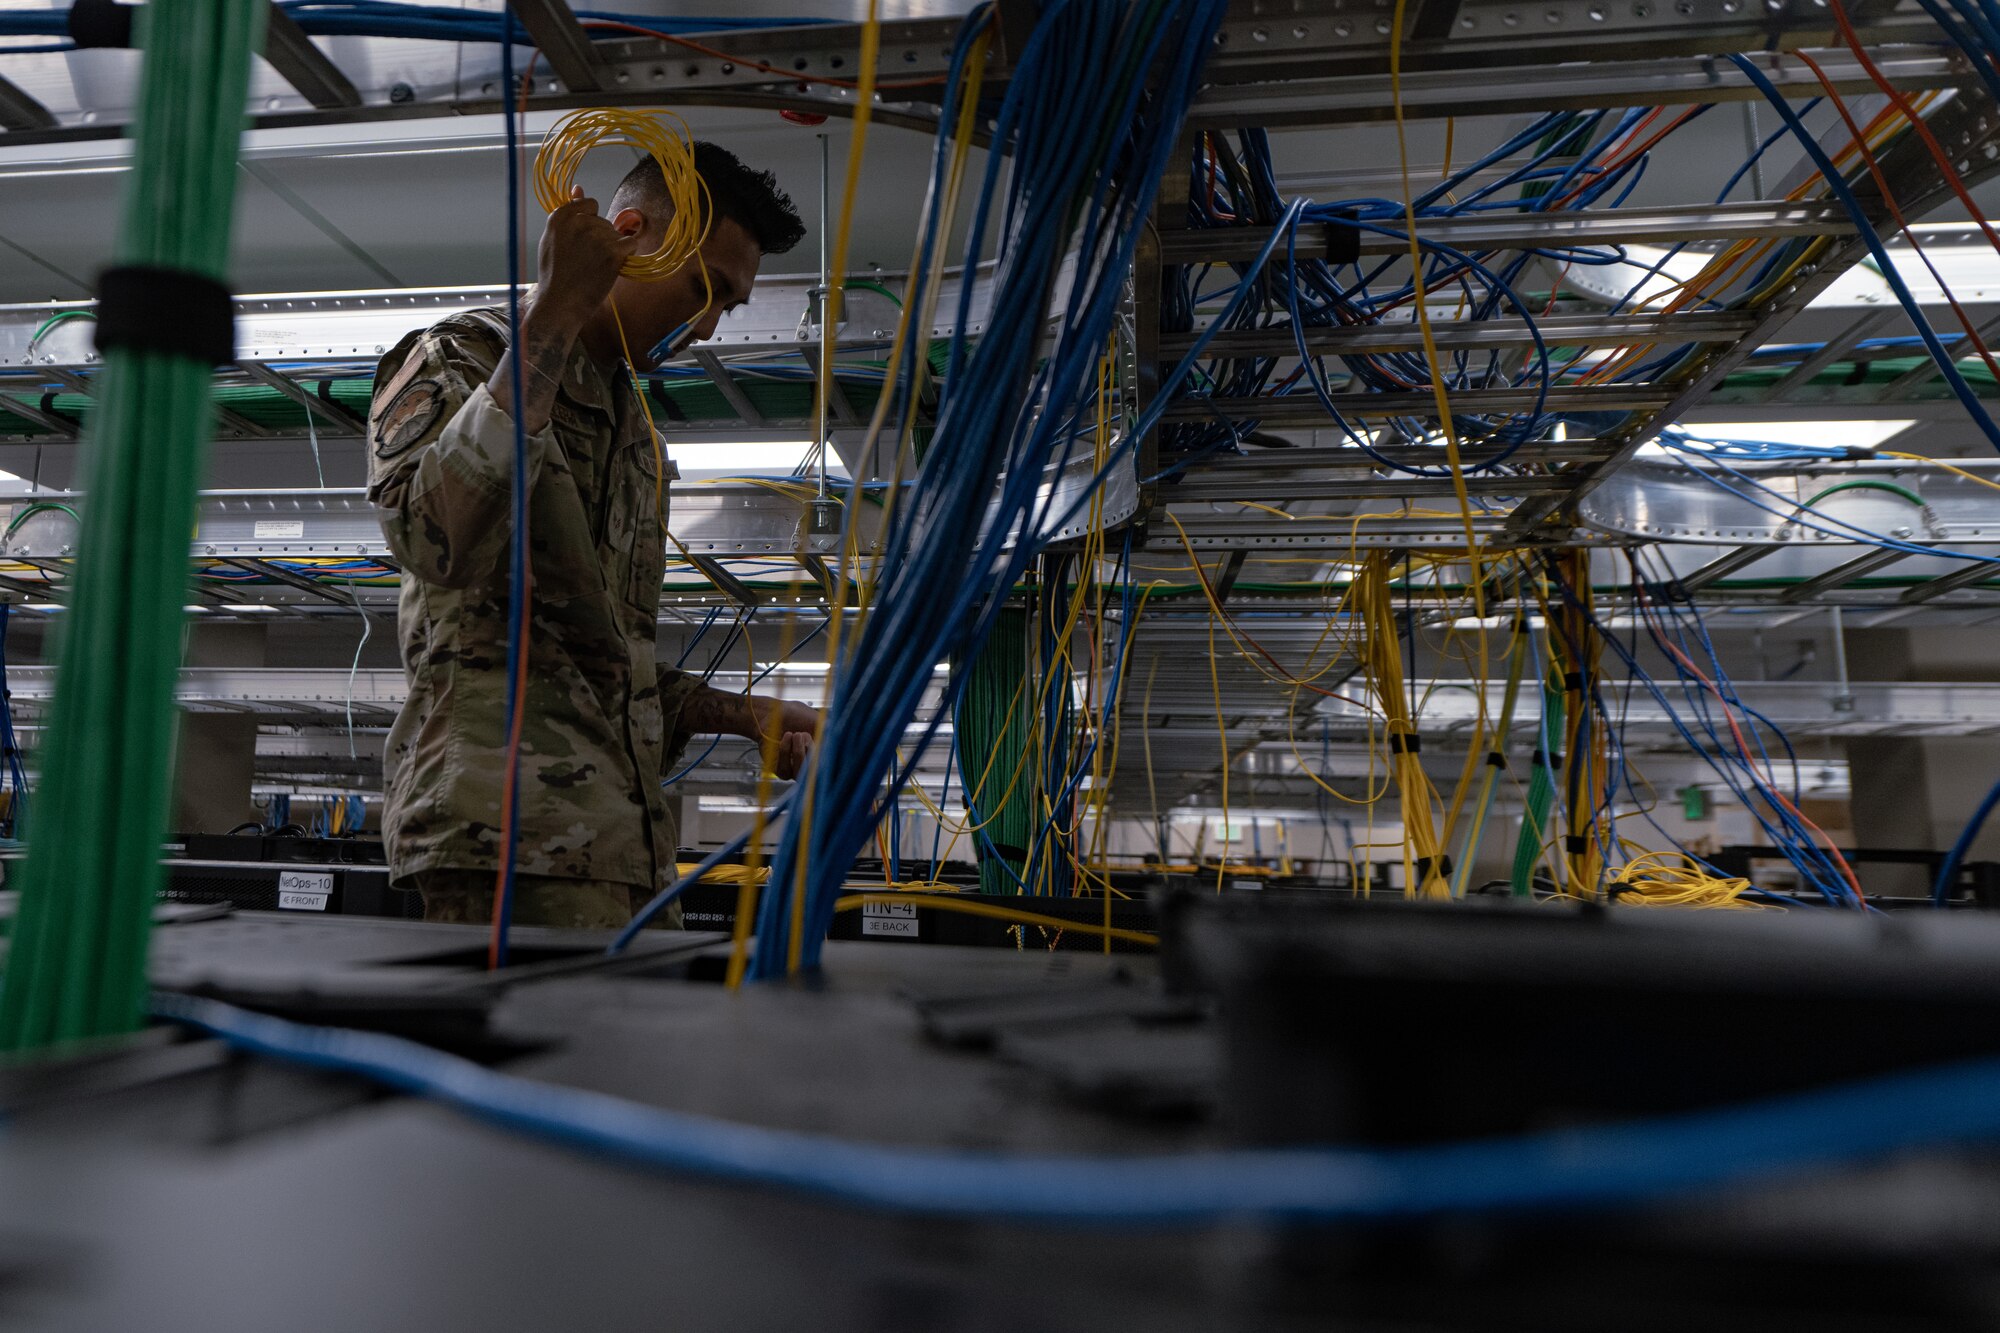 Network infrastructure technicians integrate and supervise network design, and configuration operations. (U.S. Air Force photo by Airman 1st Class Derrick Bole)